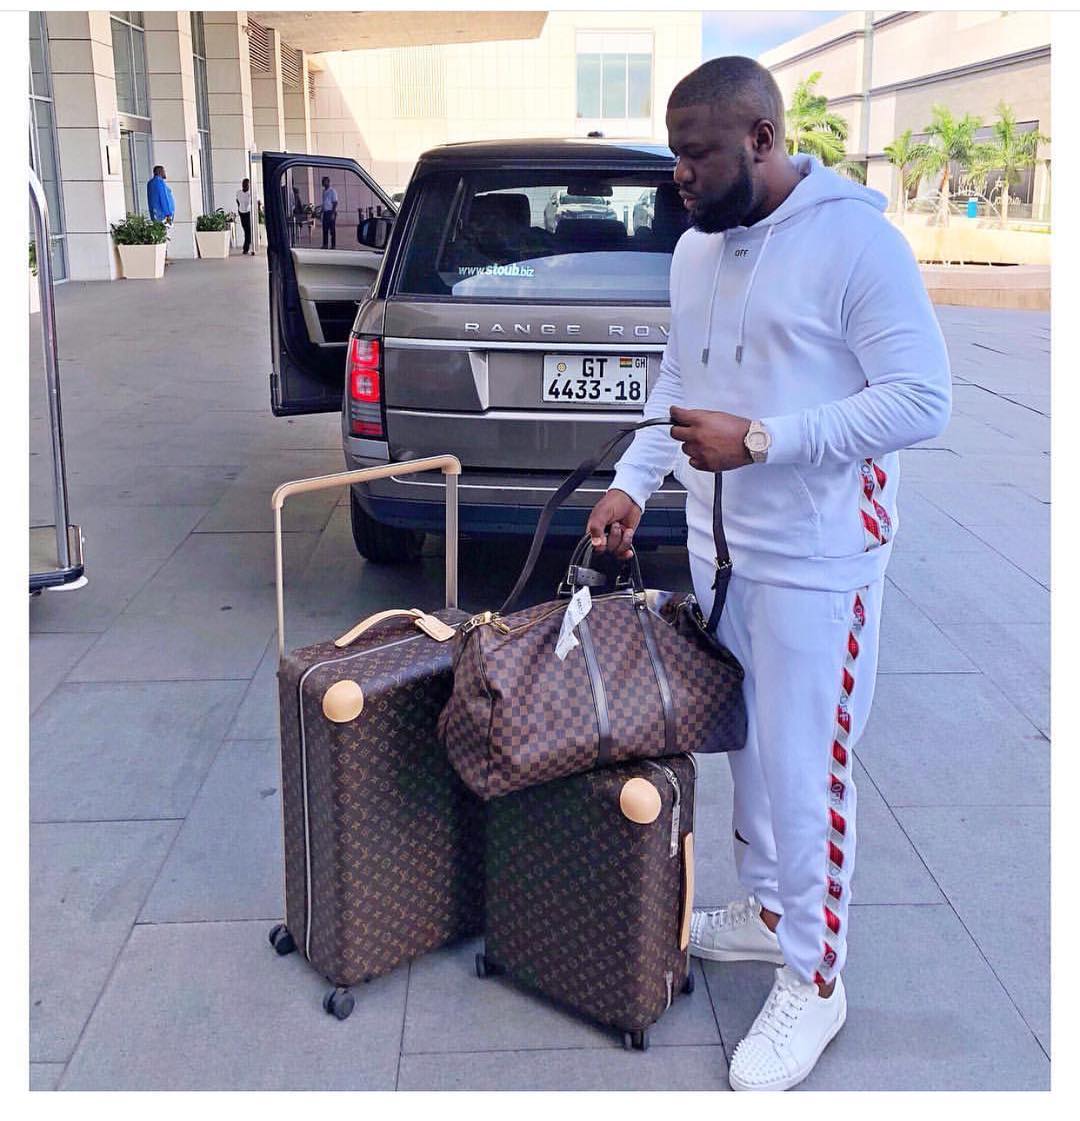 Hushpuppi has been sentenced to an 11-year prison term for internet fraud and money laundering